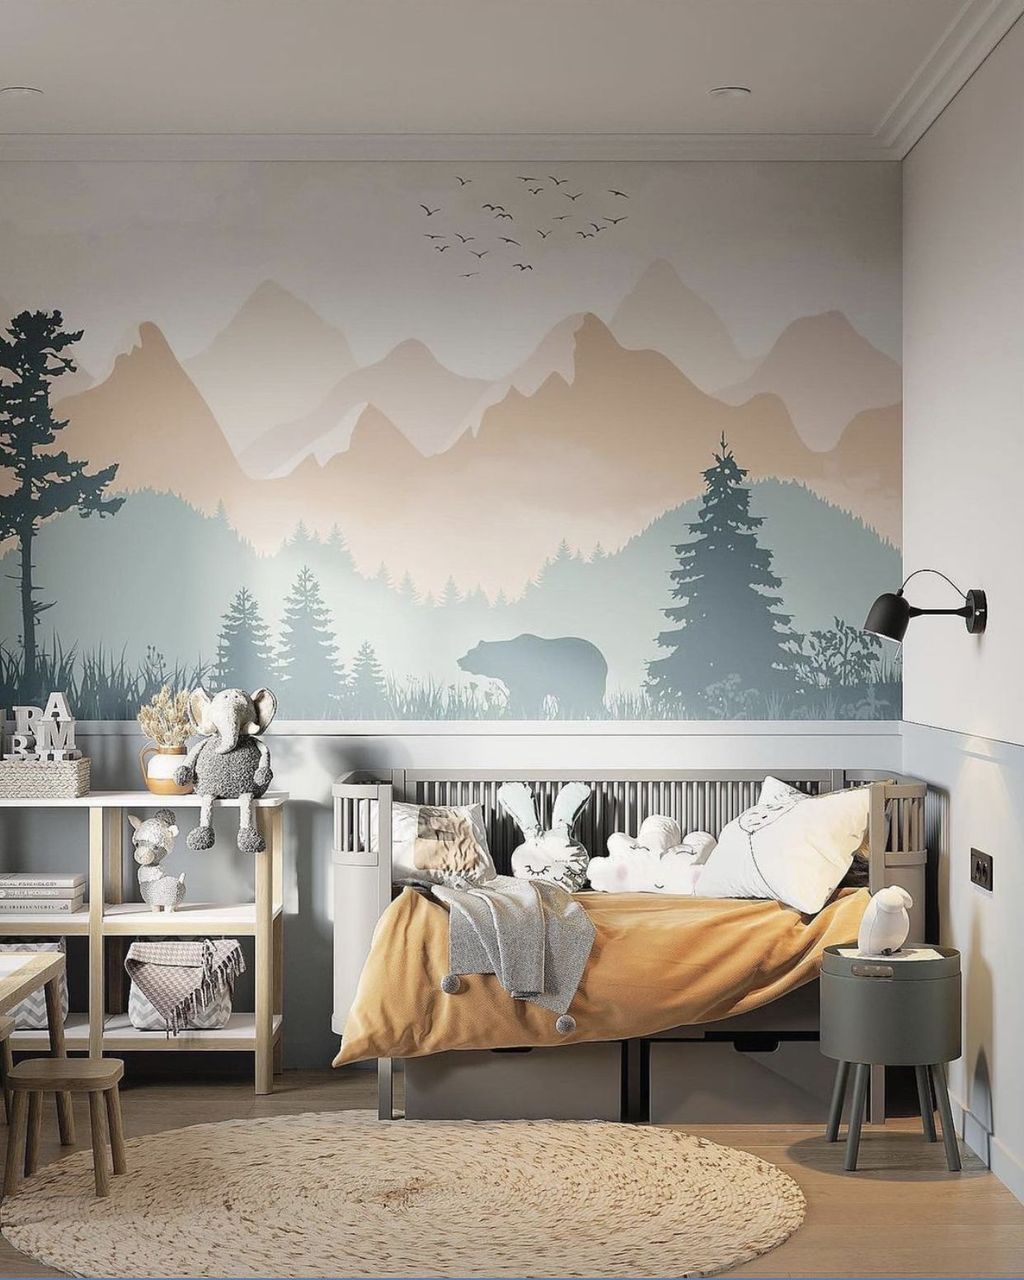 Kid bedroom with nature theme mural, grey crib and wicker round carpet